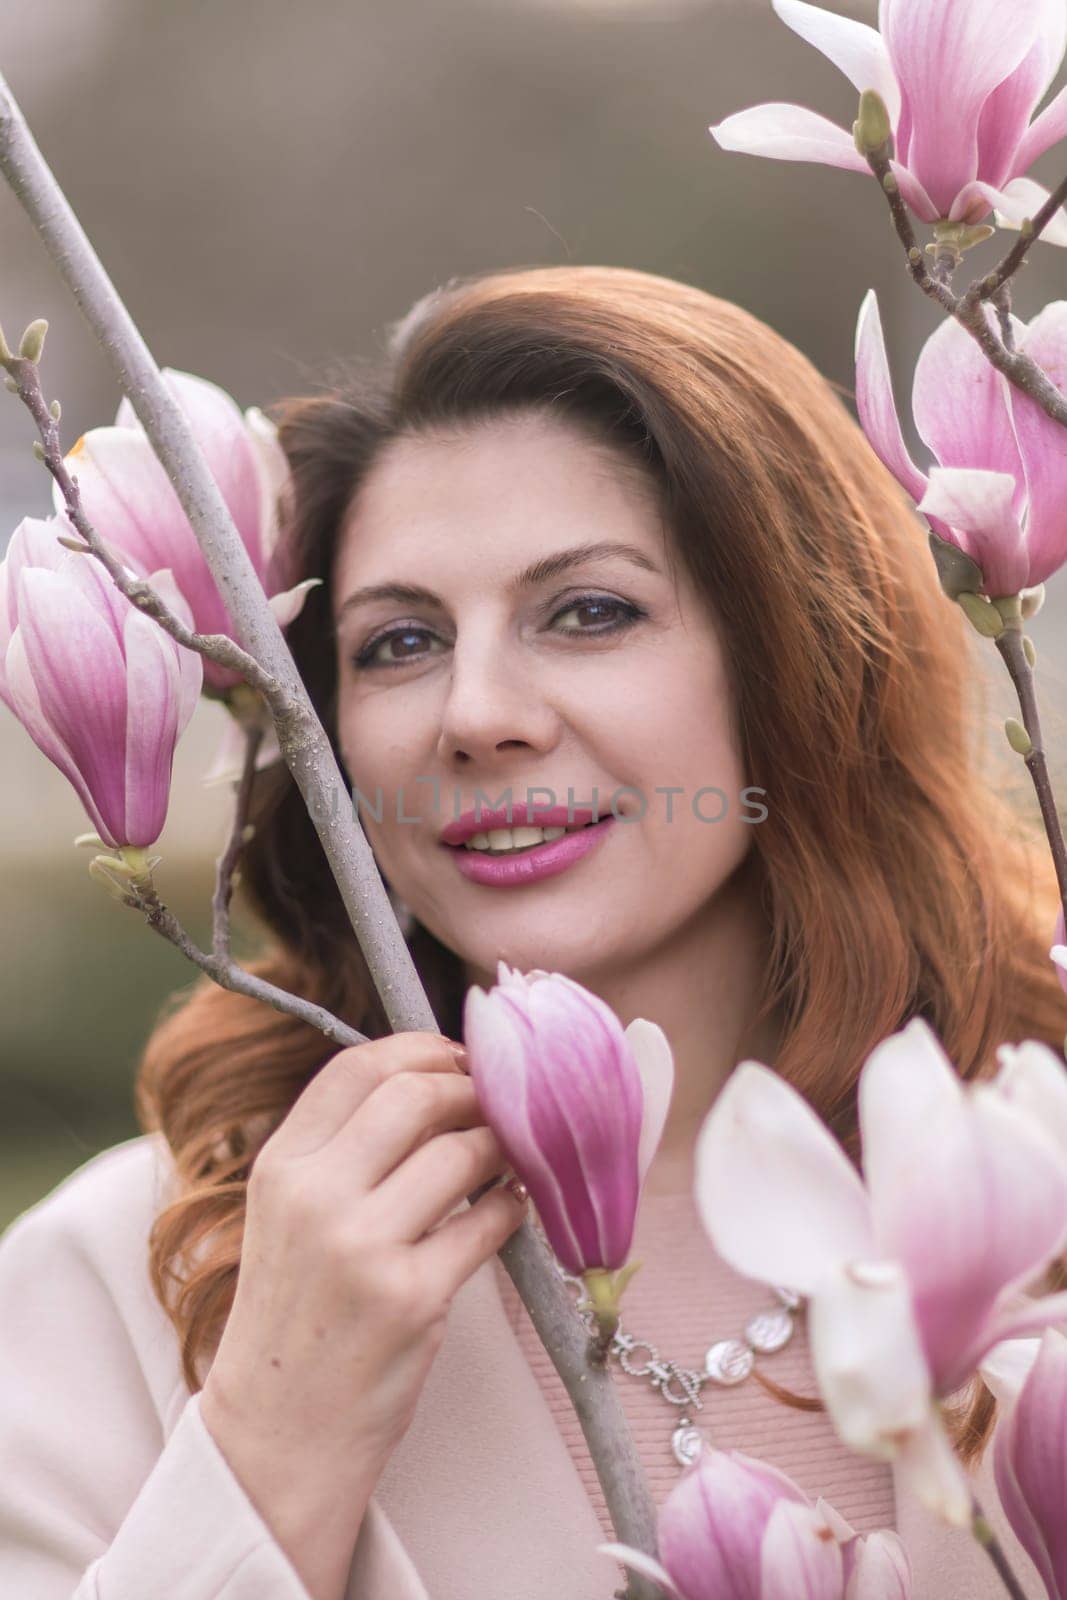 Woman magnolia flowers, surrounded by blossoming trees, hair down, wearing a light coat. Captured during spring, showcasing natural beauty and seasonal change